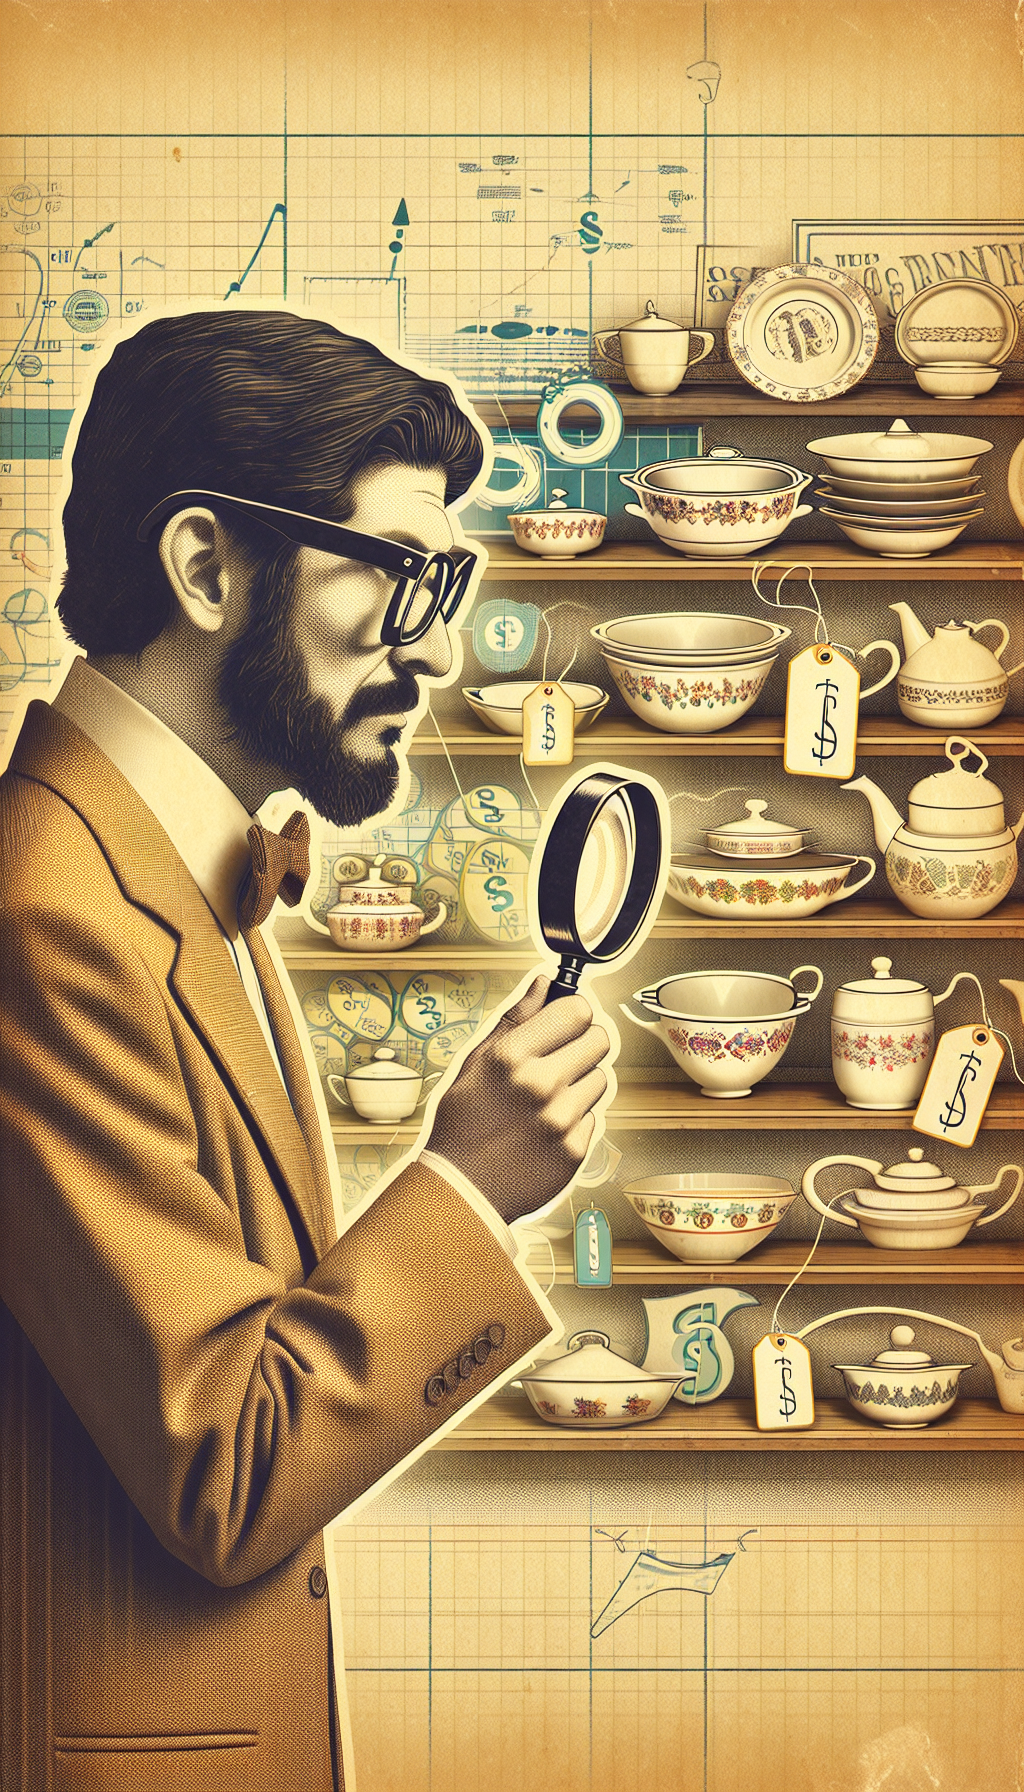 A whimsical digital collage shows a bespectacled appraiser magnifying glass in hand, examining a vibrant shelf of CorningWare. A series of price tags float above each piece, with dollar signs and vintage motifs surrounding them. The backdrop subtly transitions from sepia tones on one side to contemporary hues on the other, embodying the transition from past value to present worth.